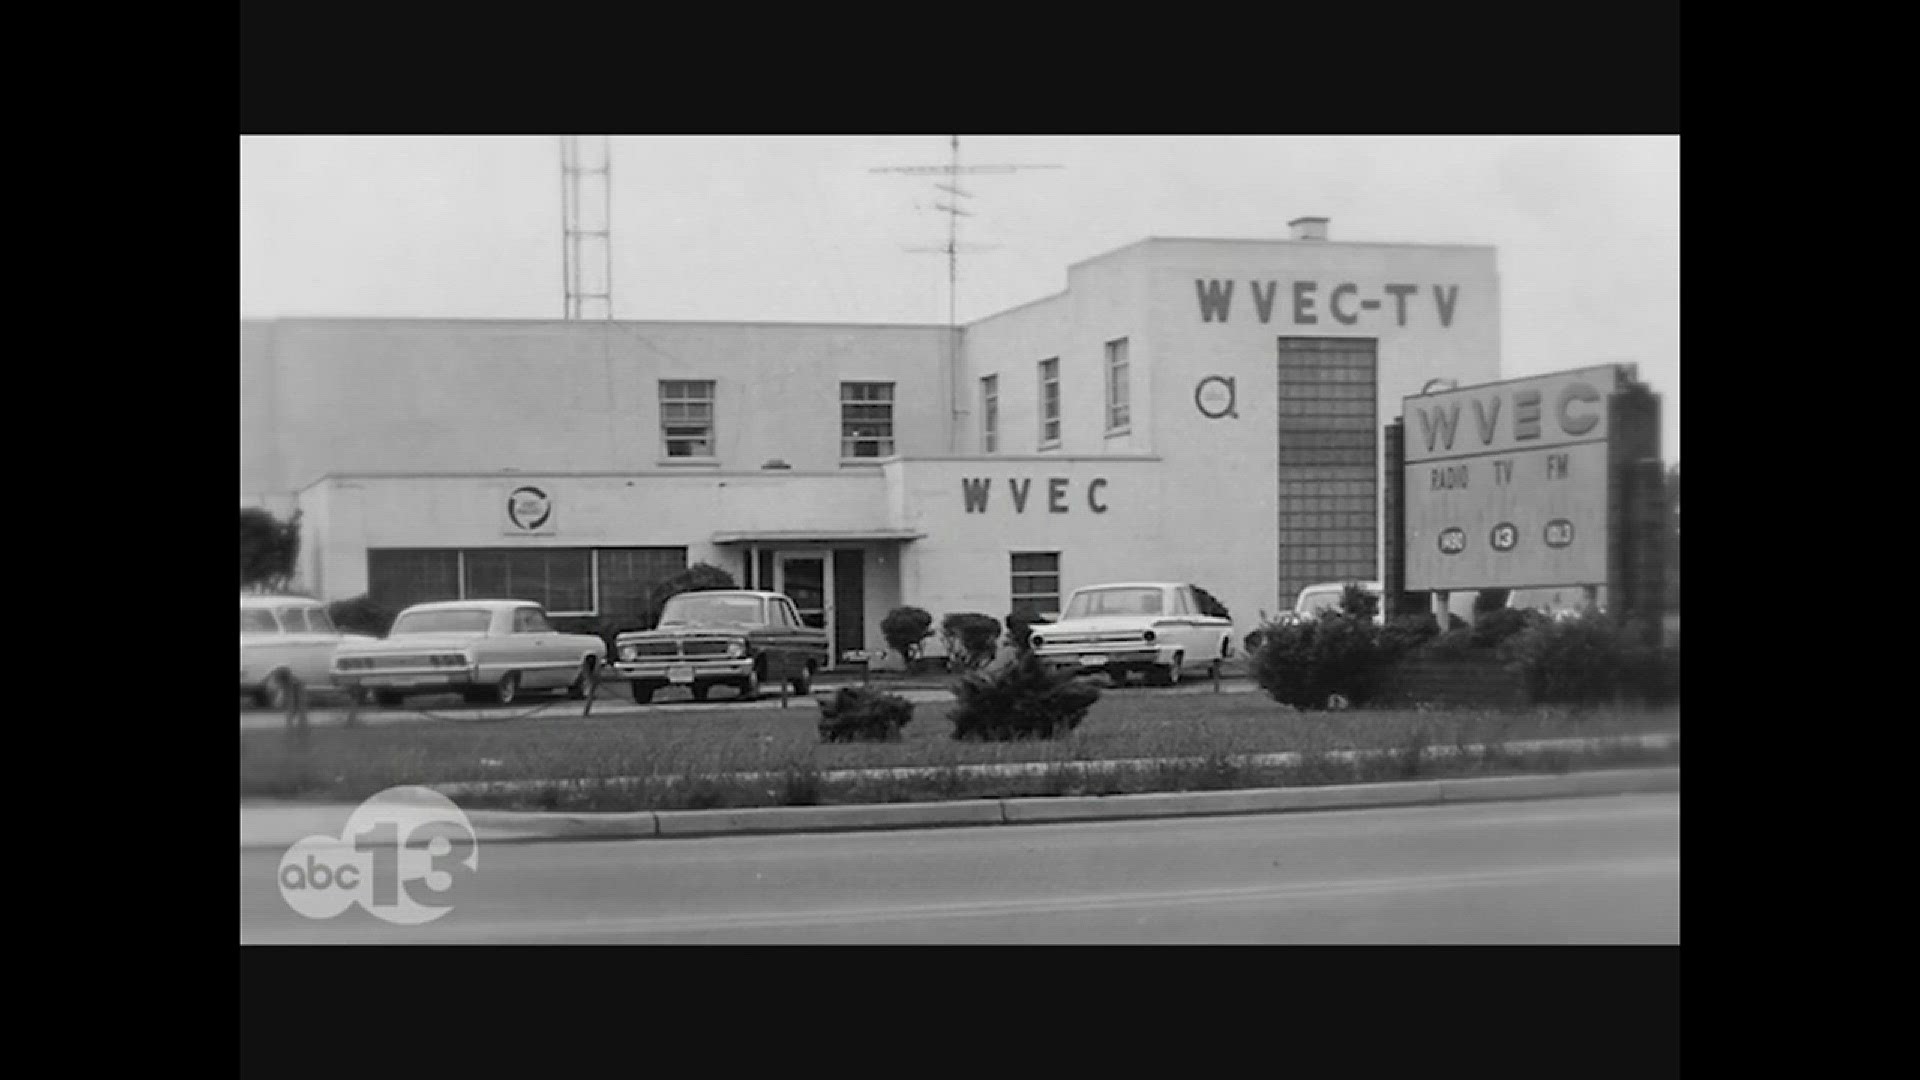 A look back on the first 62 years of WVEC.